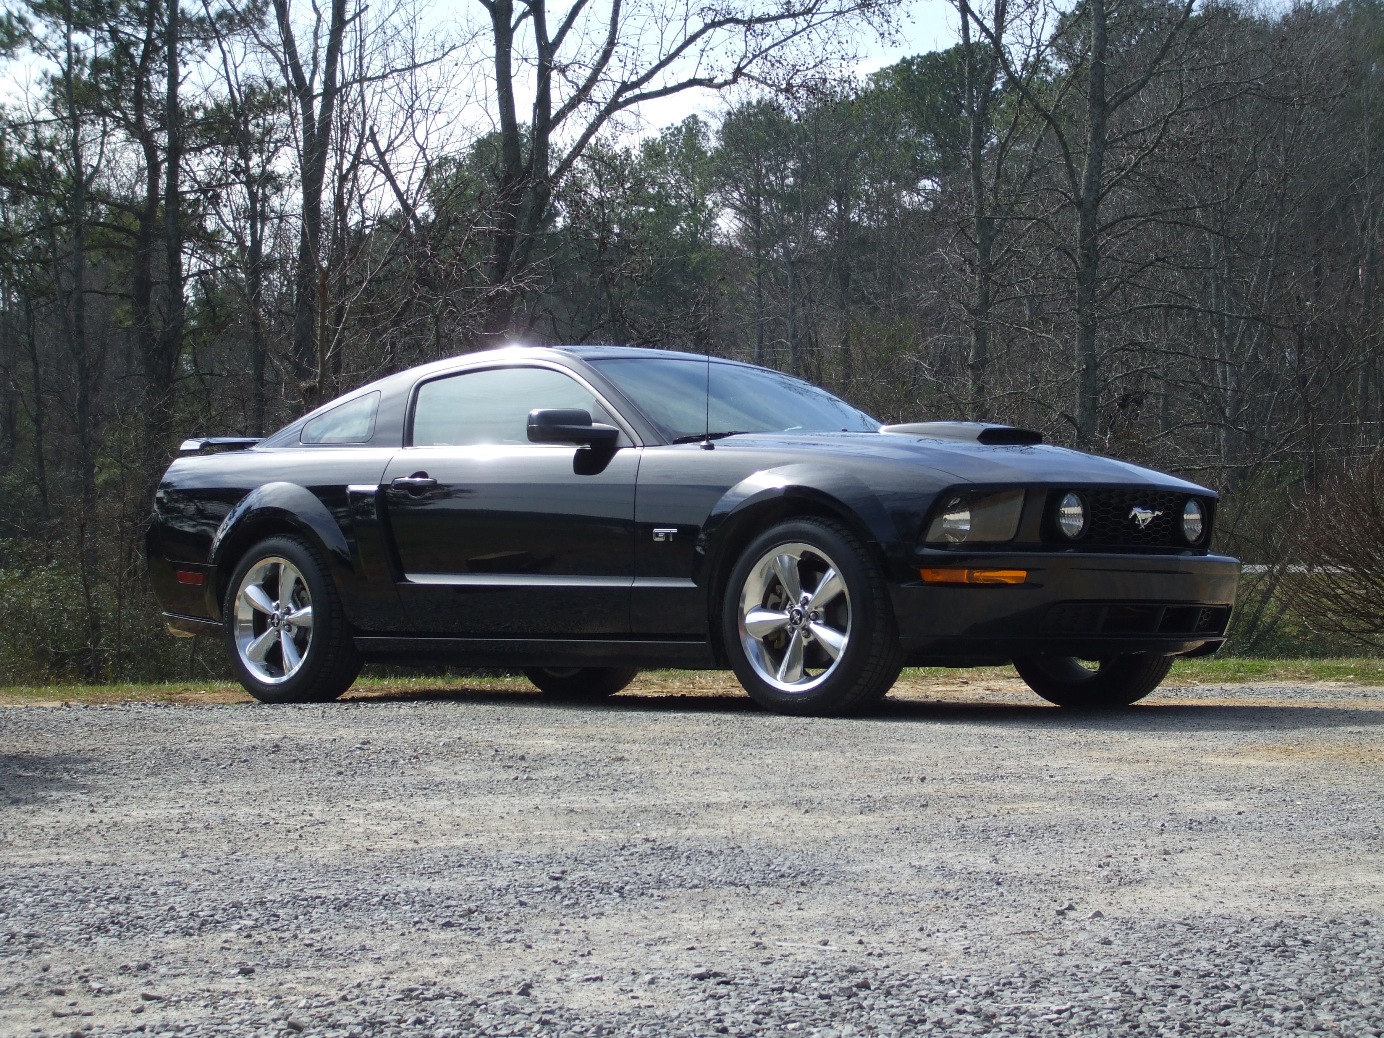  2007 Ford Mustang GT 5-speed Coupe